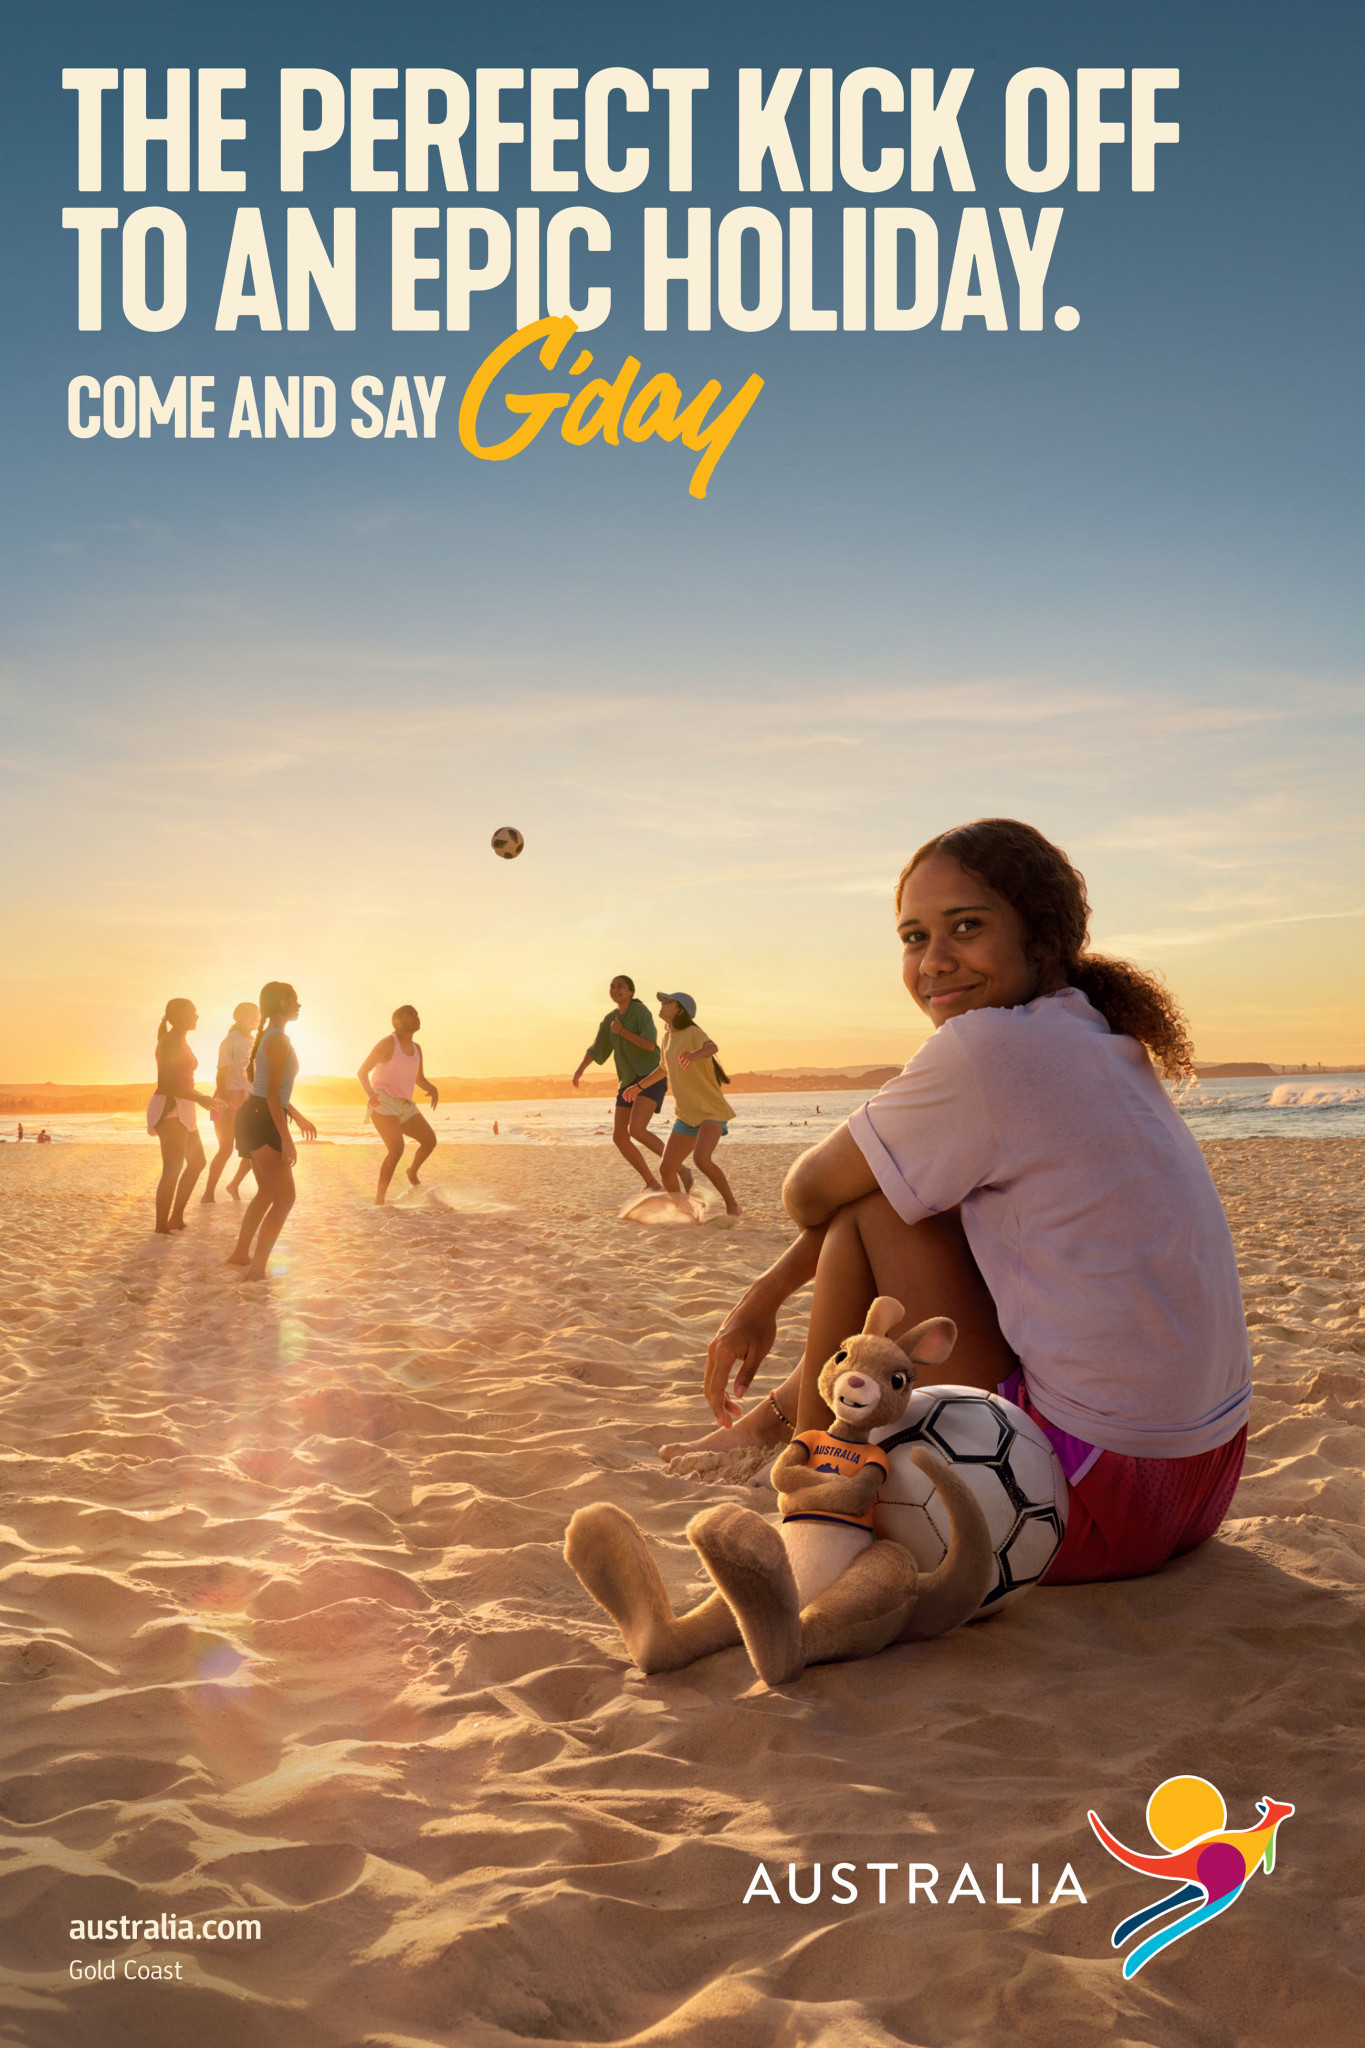 Indigenous footballers featured in a Tourism Australia campaign launched for the FIFA Women's World Cup ©Tourism Australia